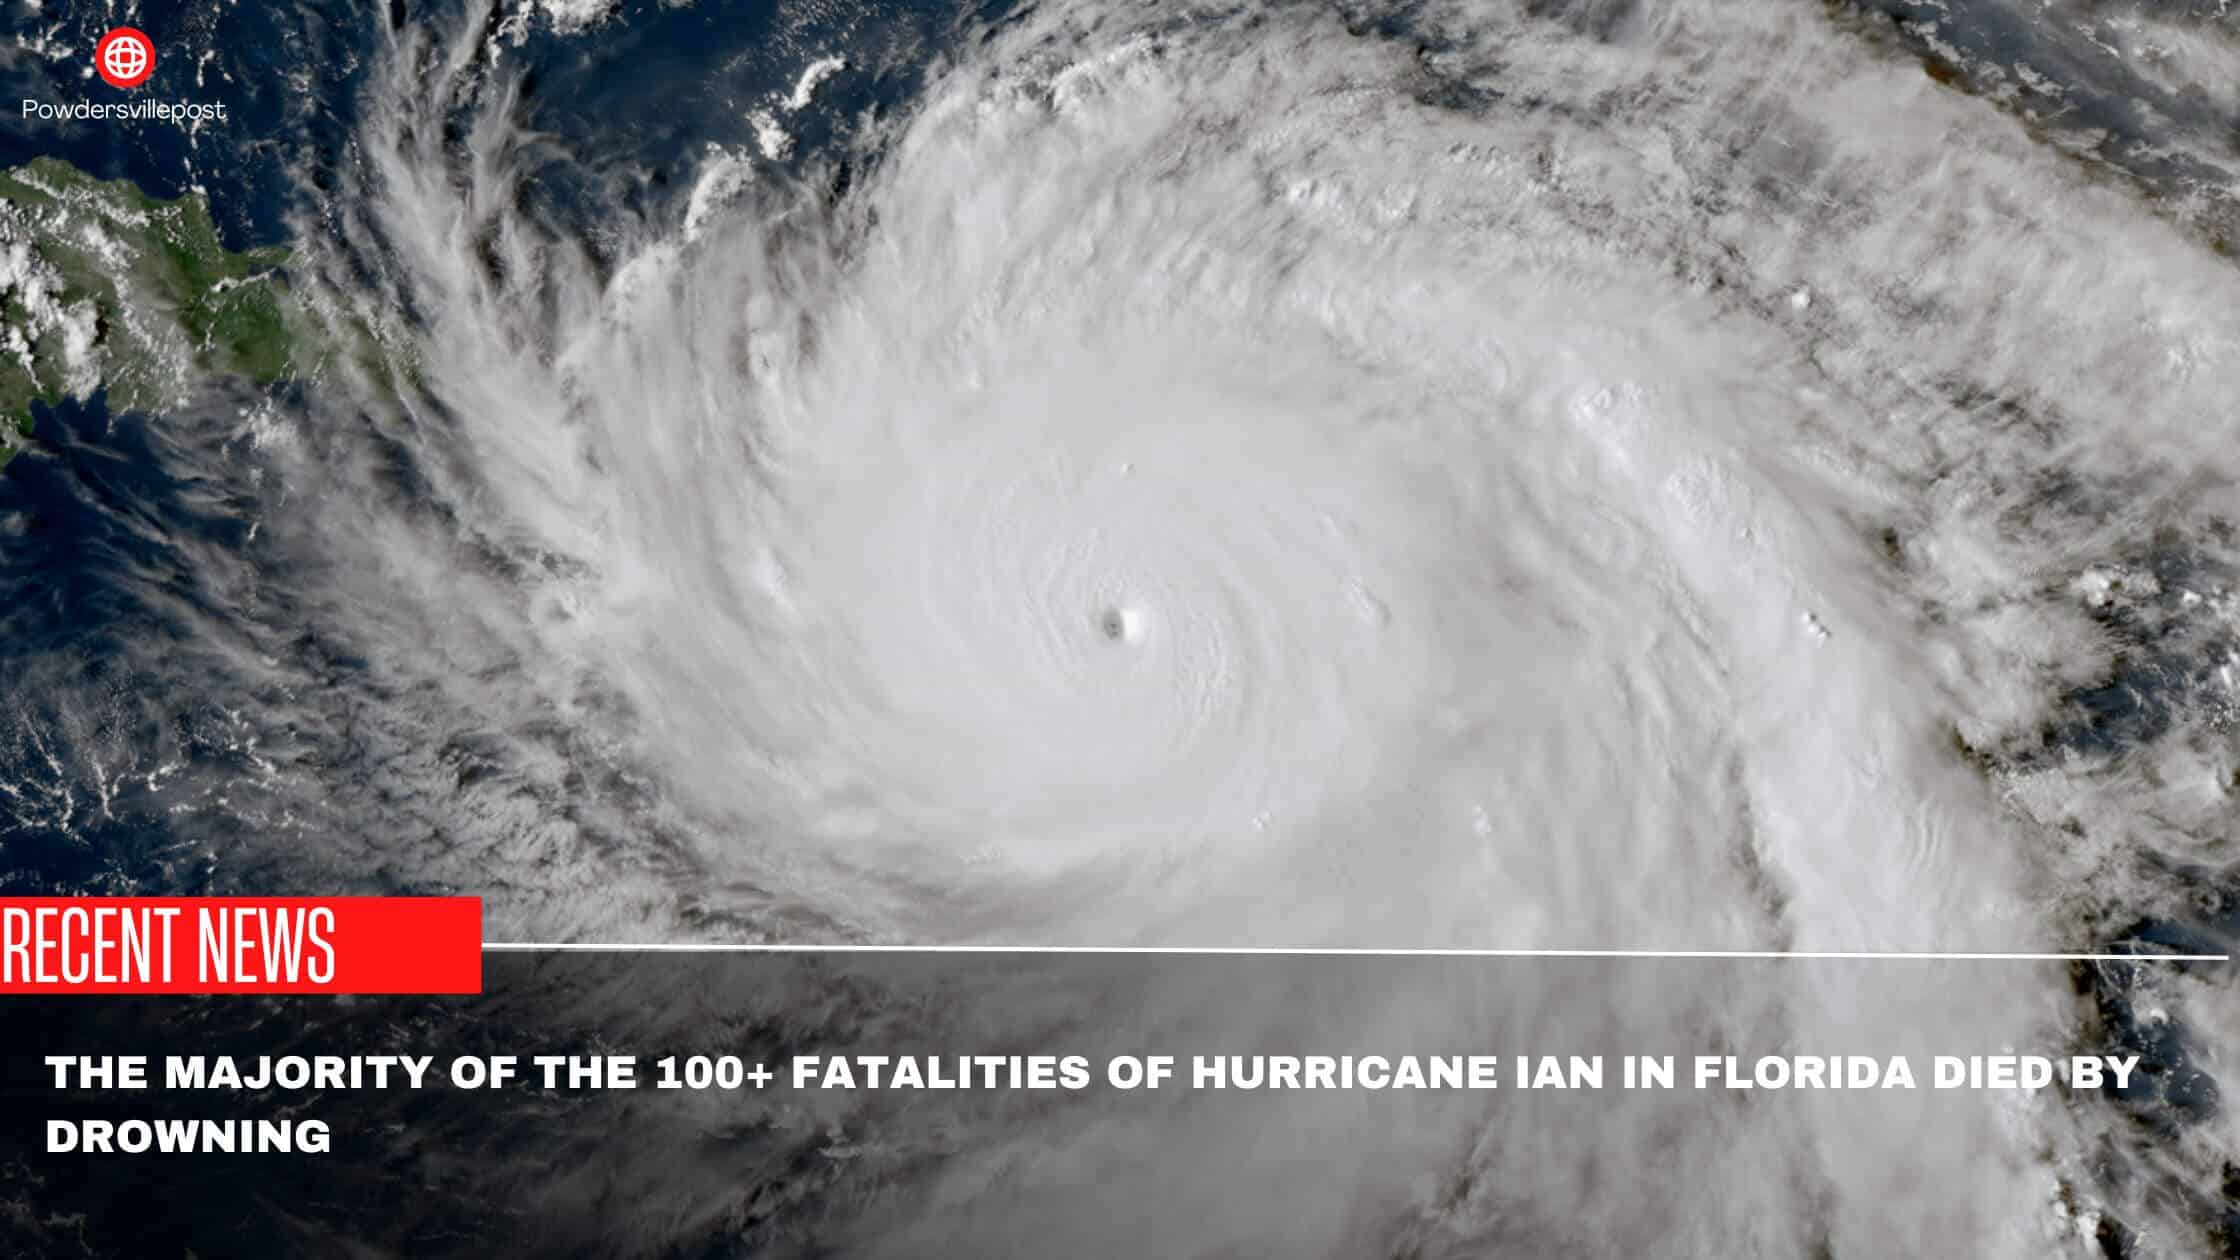 The Majority Of The 100+ Fatalities Of Hurricane Ian In Florida Died By Drowning